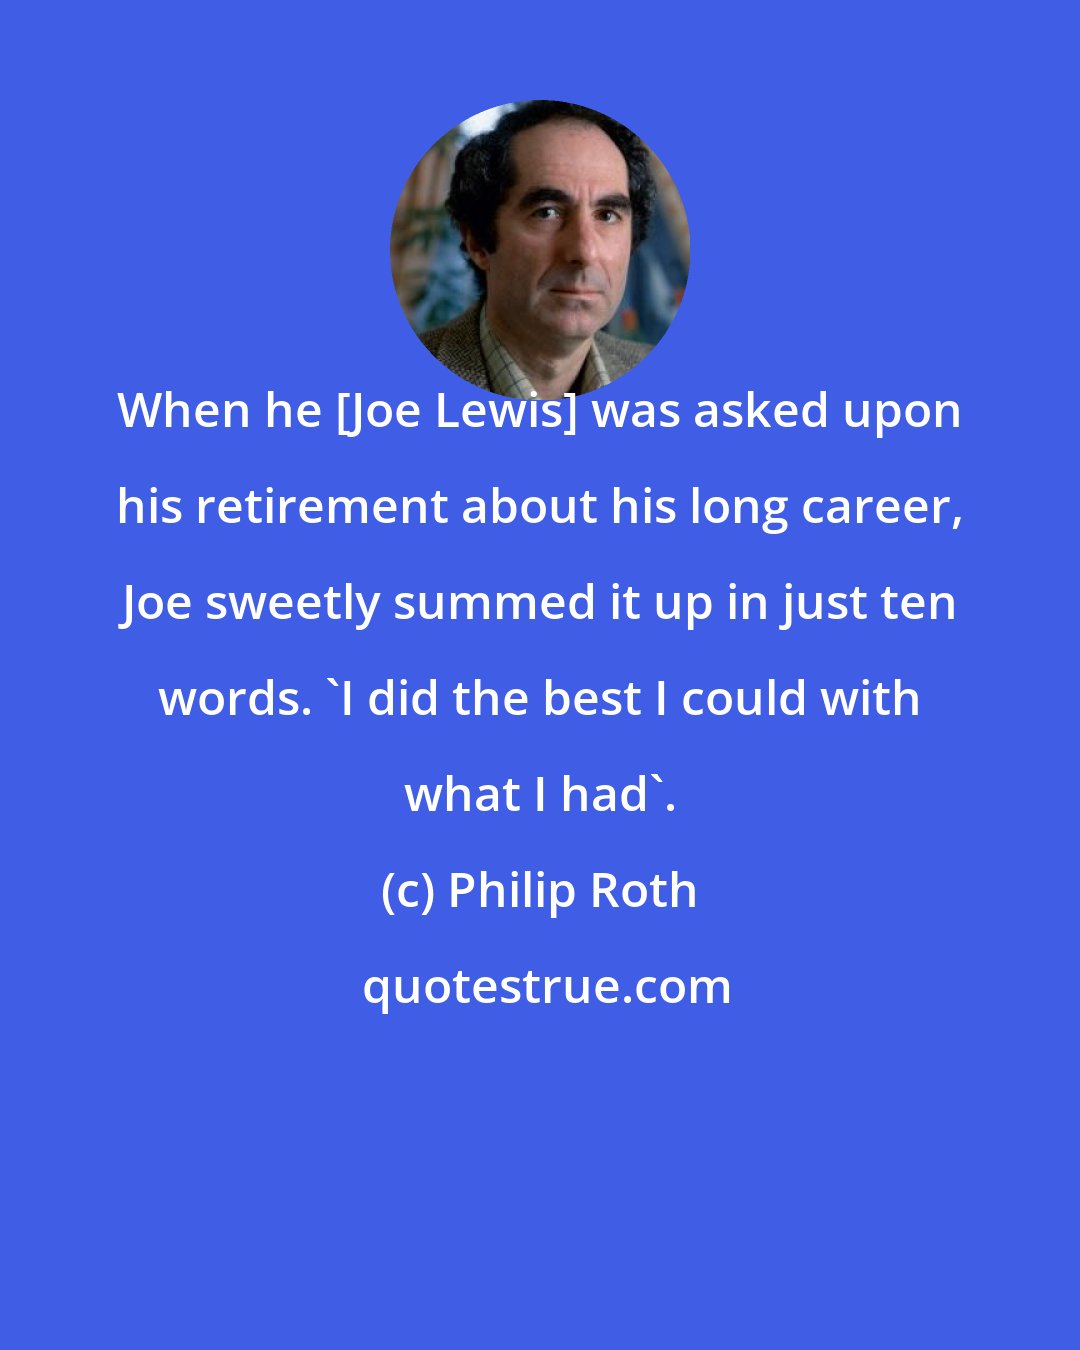 Philip Roth: When he [Joe Lewis] was asked upon his retirement about his long career, Joe sweetly summed it up in just ten words. 'I did the best I could with what I had'.